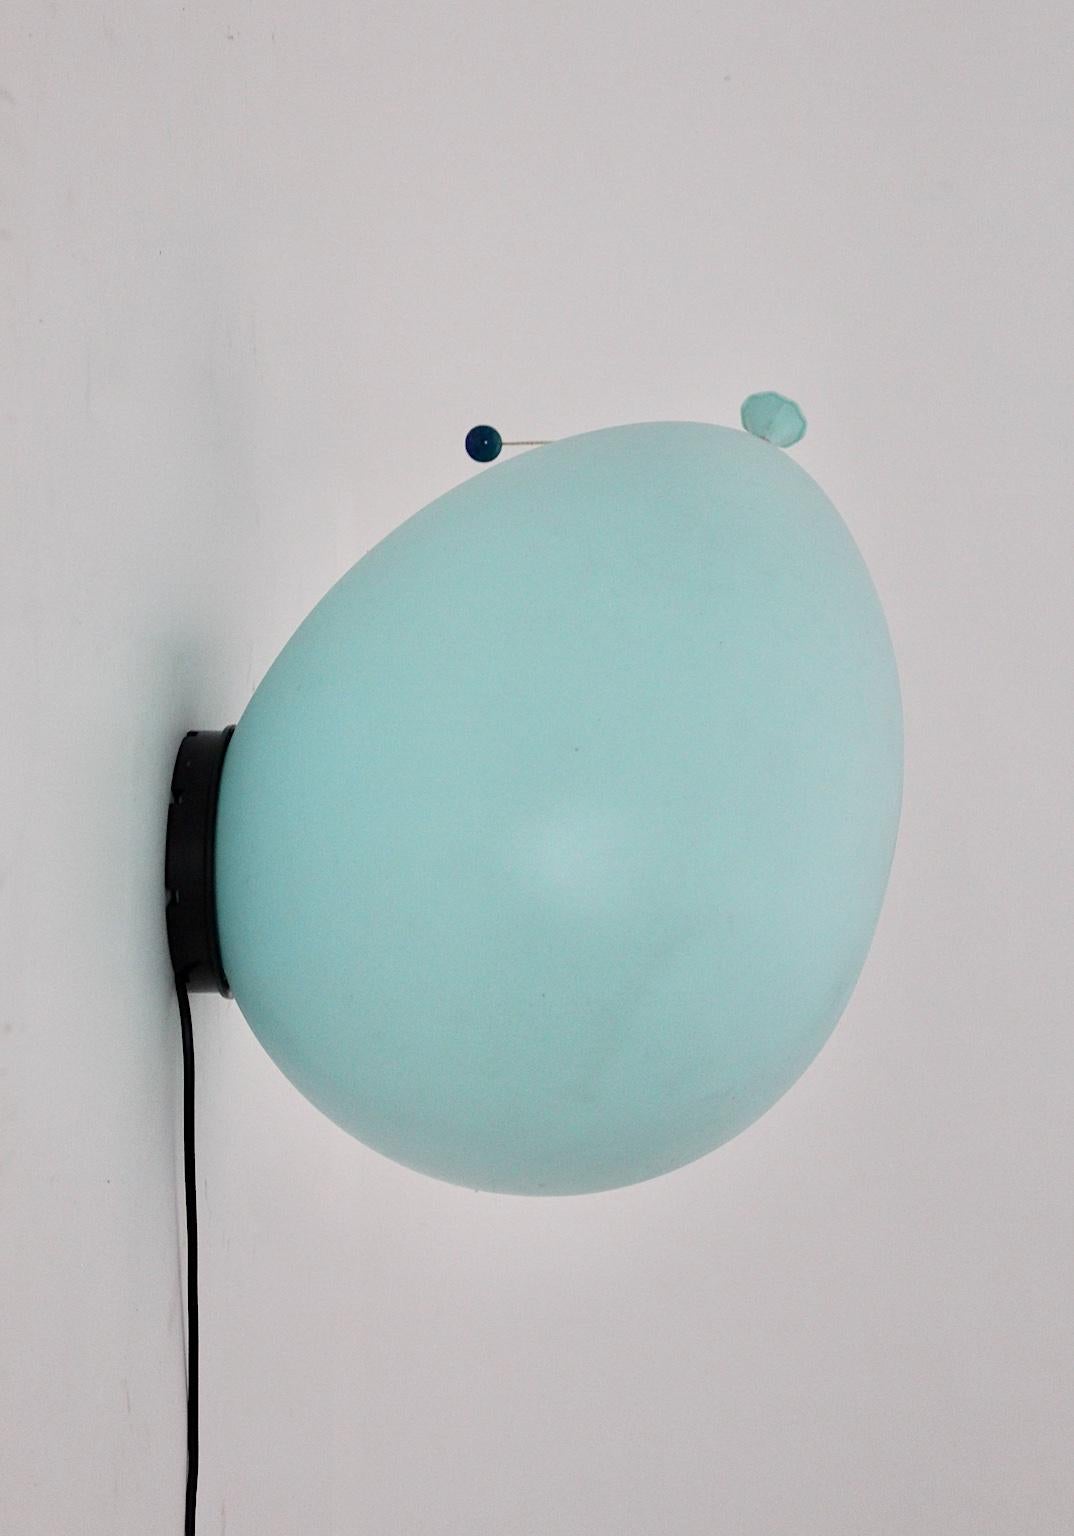 Modern vintage blue flushmount or sconce, which is colorful and nice.
Yves Christin designed the iconic lighting for Bilumen Italy in the 1980s.
The flushmount could also mounted as a sconce. The lamp shade was made of light blue polyurethan, while